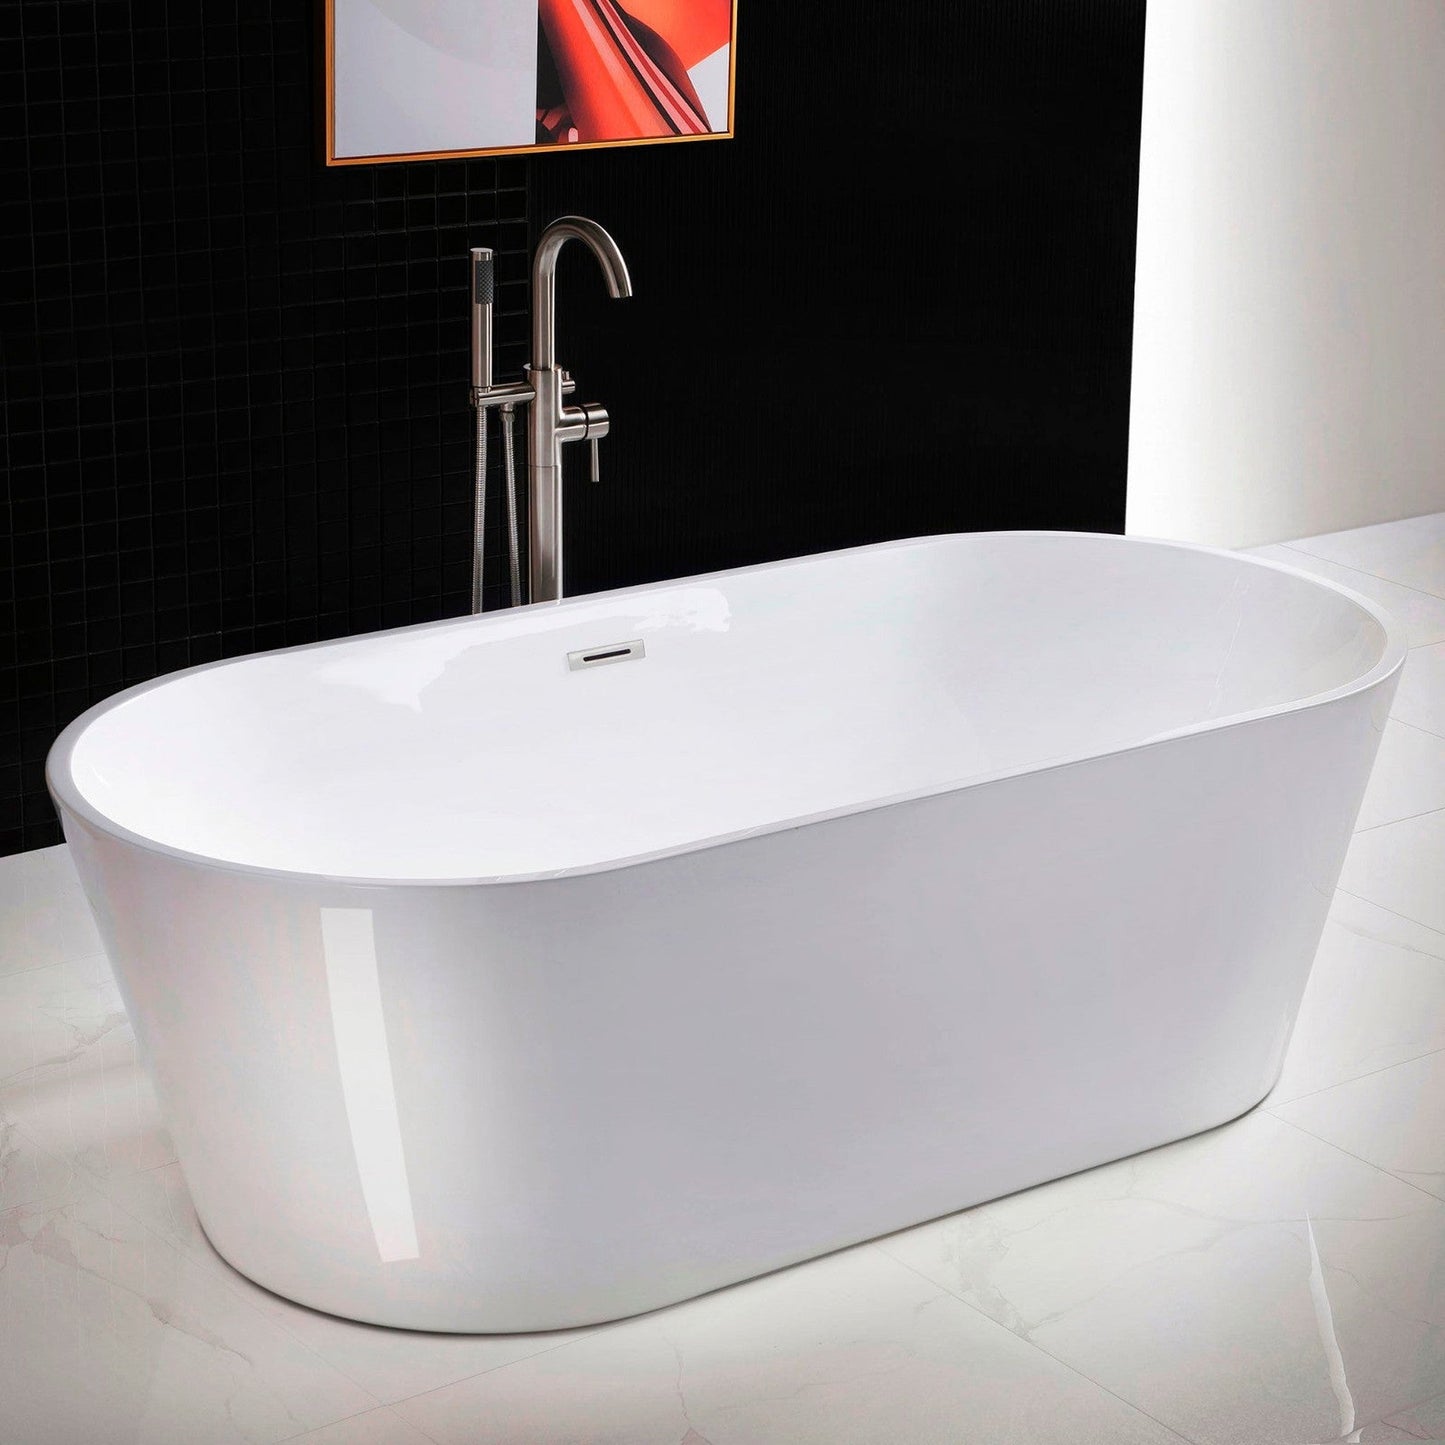 WoodBridge 71" White Acrylic Freestanding Contemporary Soaking Bathtub With Brushed Nickel Drain, Overflow, F0070BNRD Tub Filler and Caddy Tray